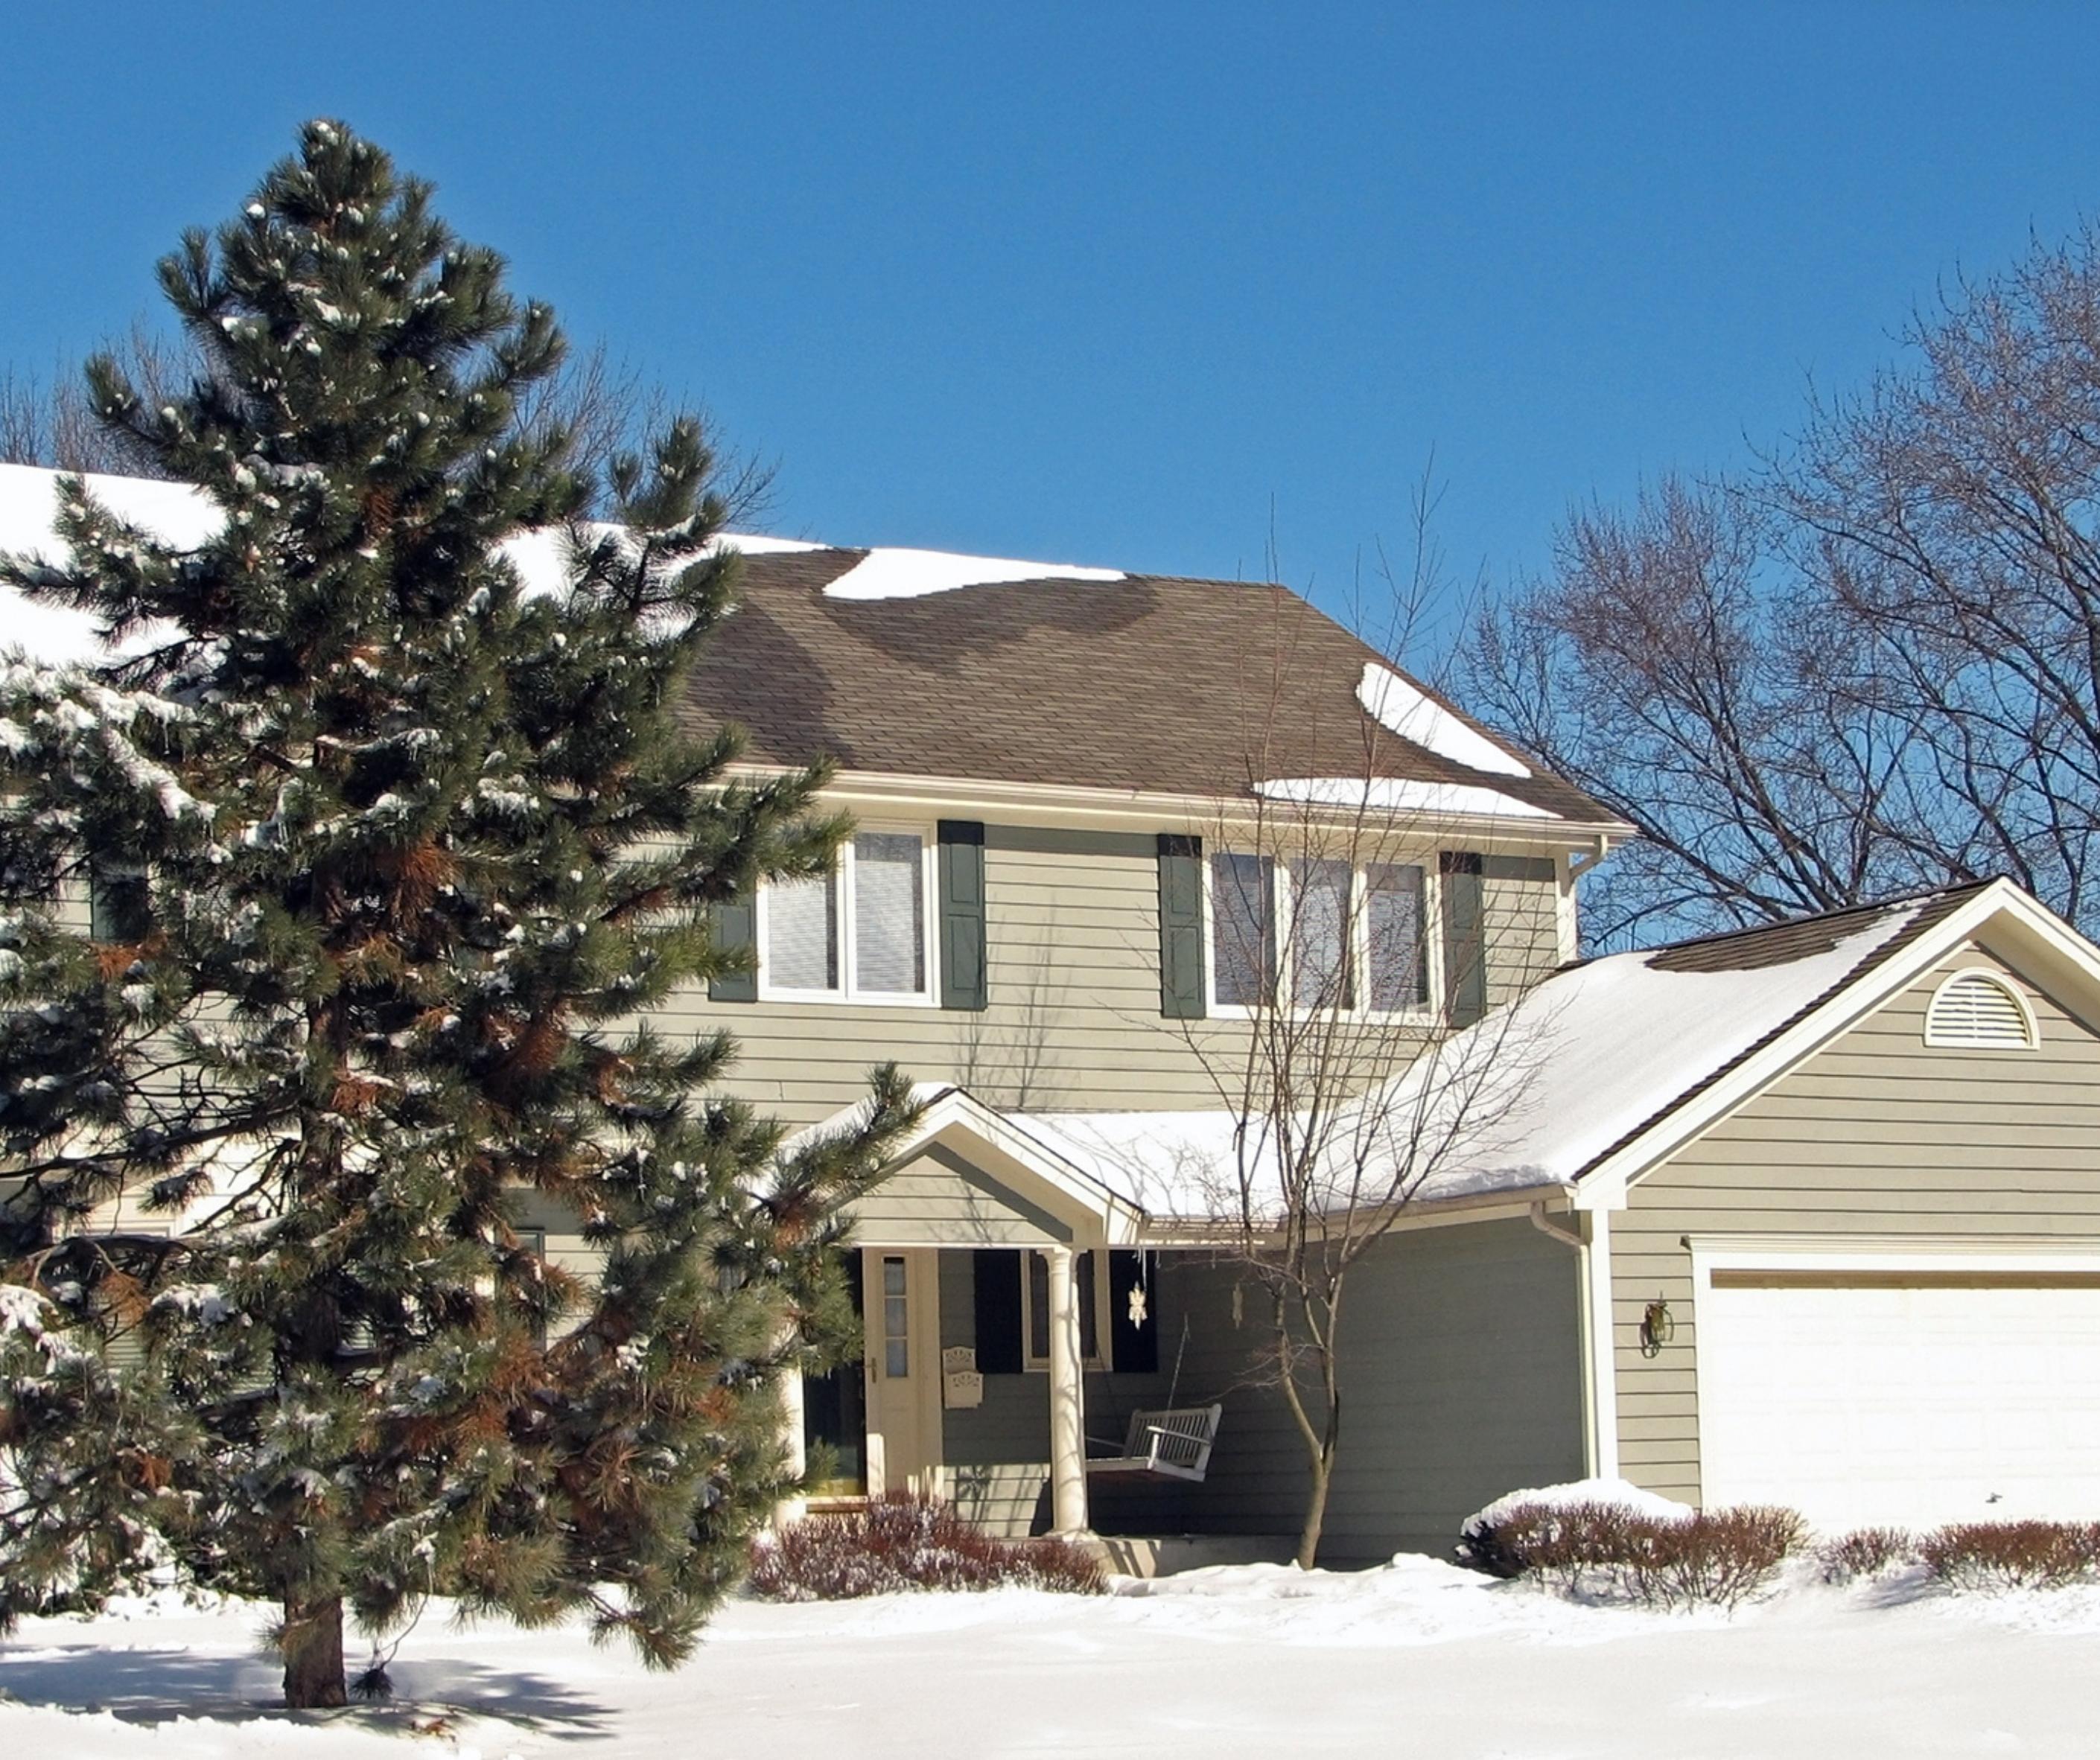 5 Reasons to Buy a Home in the Winter